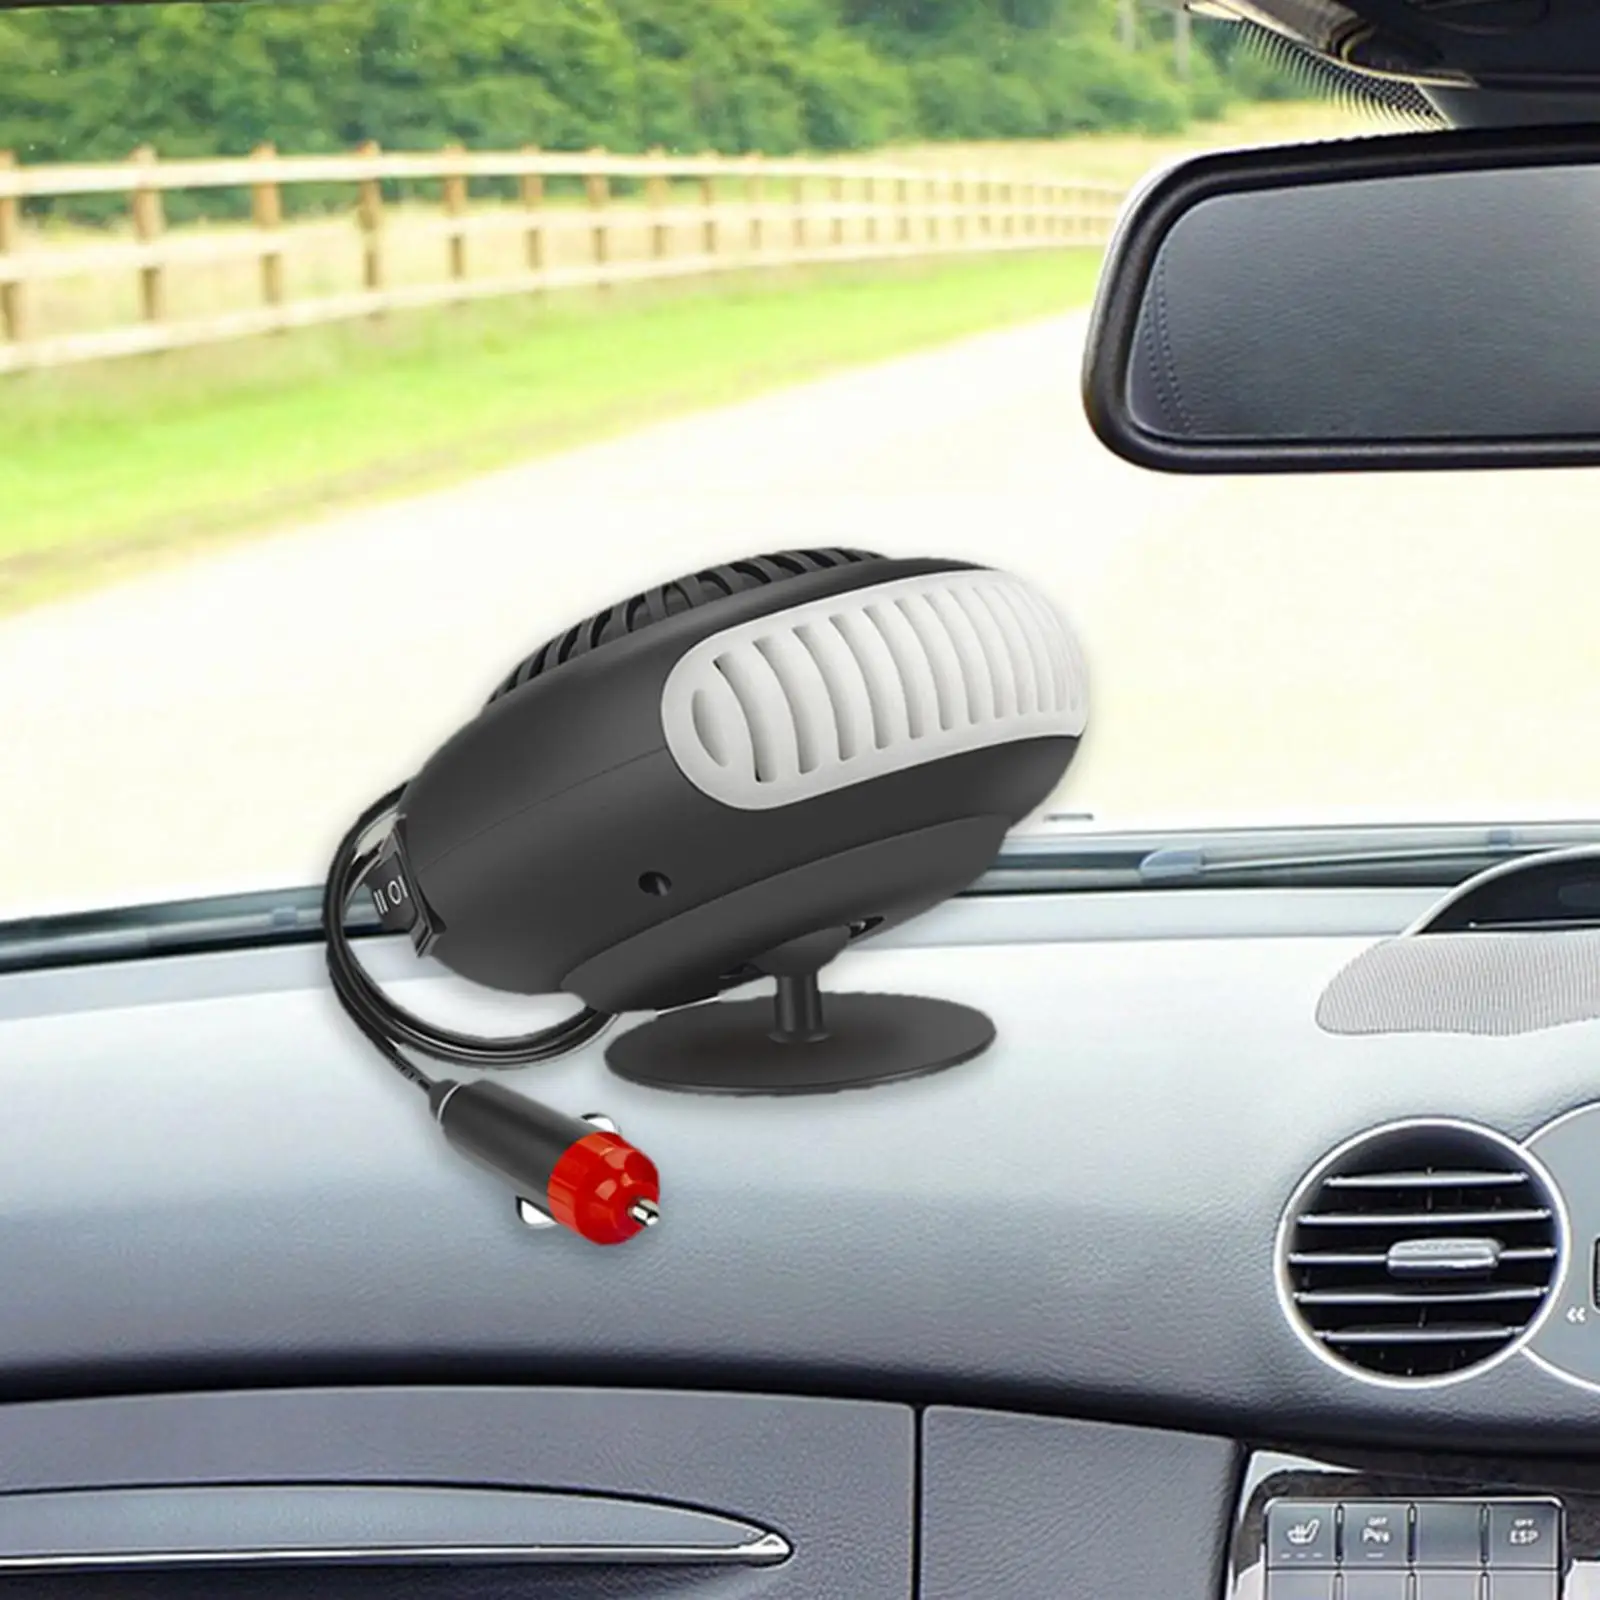 Car Heater Auto Interior Accessories Electric Demister Fast Heat 360 Degree Rotation Auto Heater Warmer for Cars Winter SUV